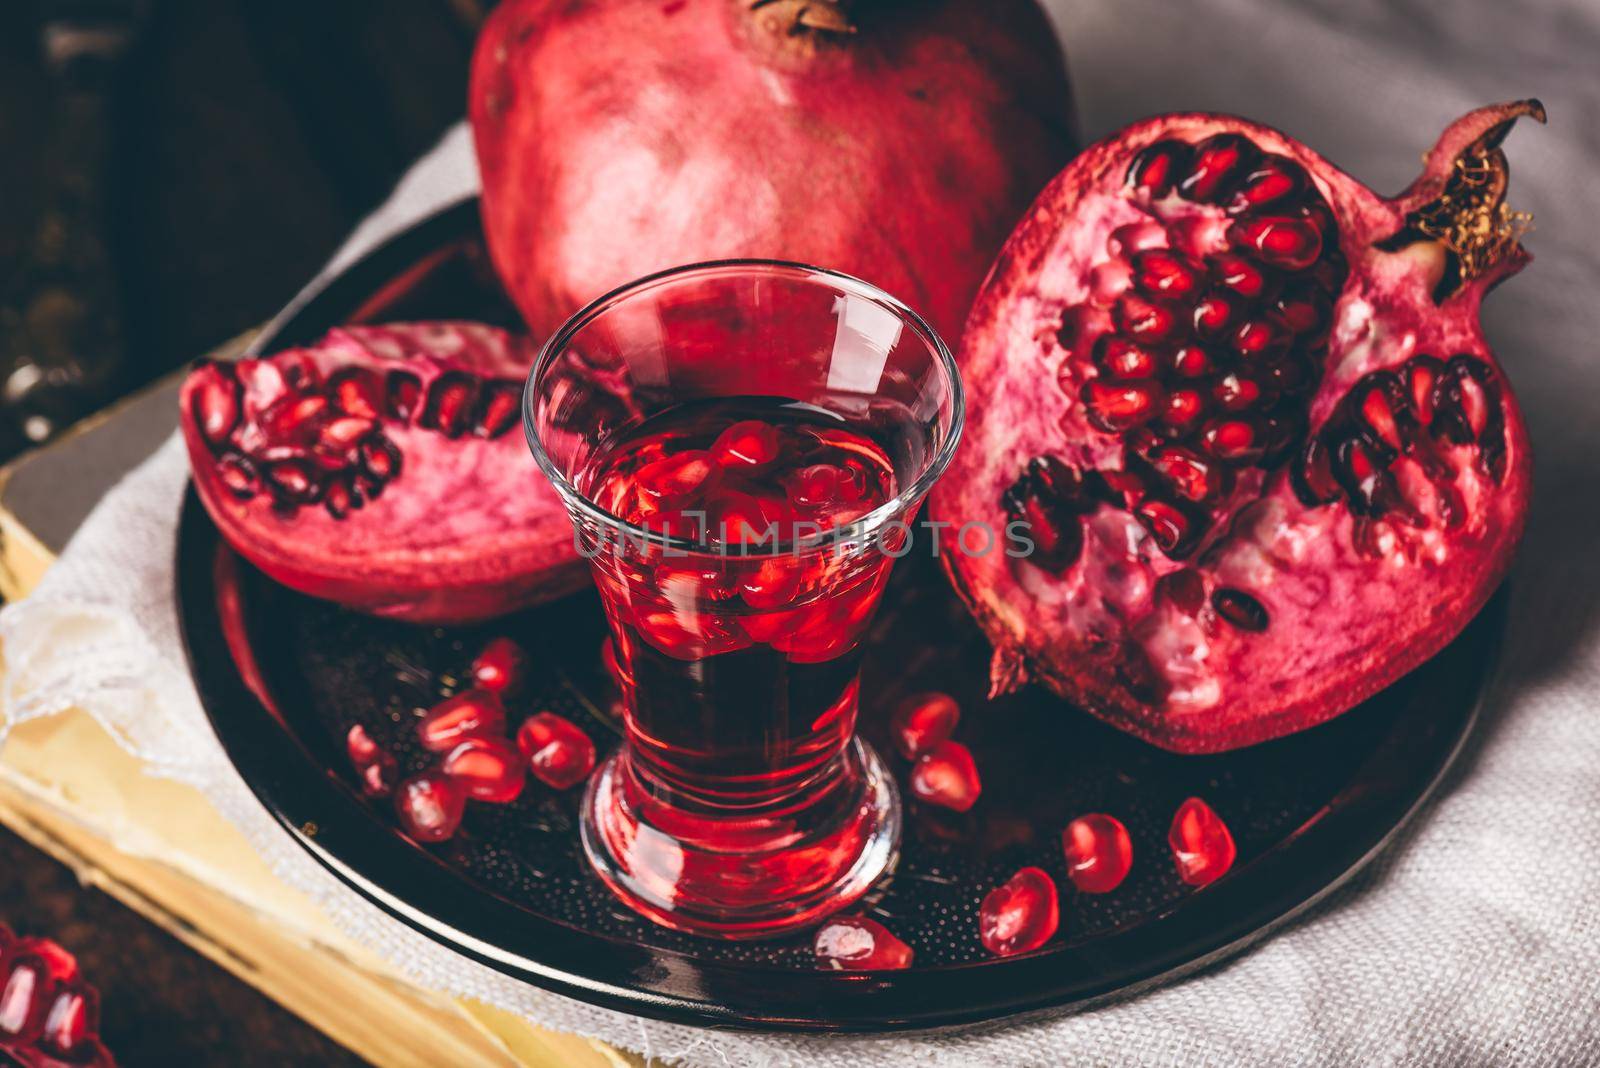 Cocktail with pomegranate fruit by Seva_blsv